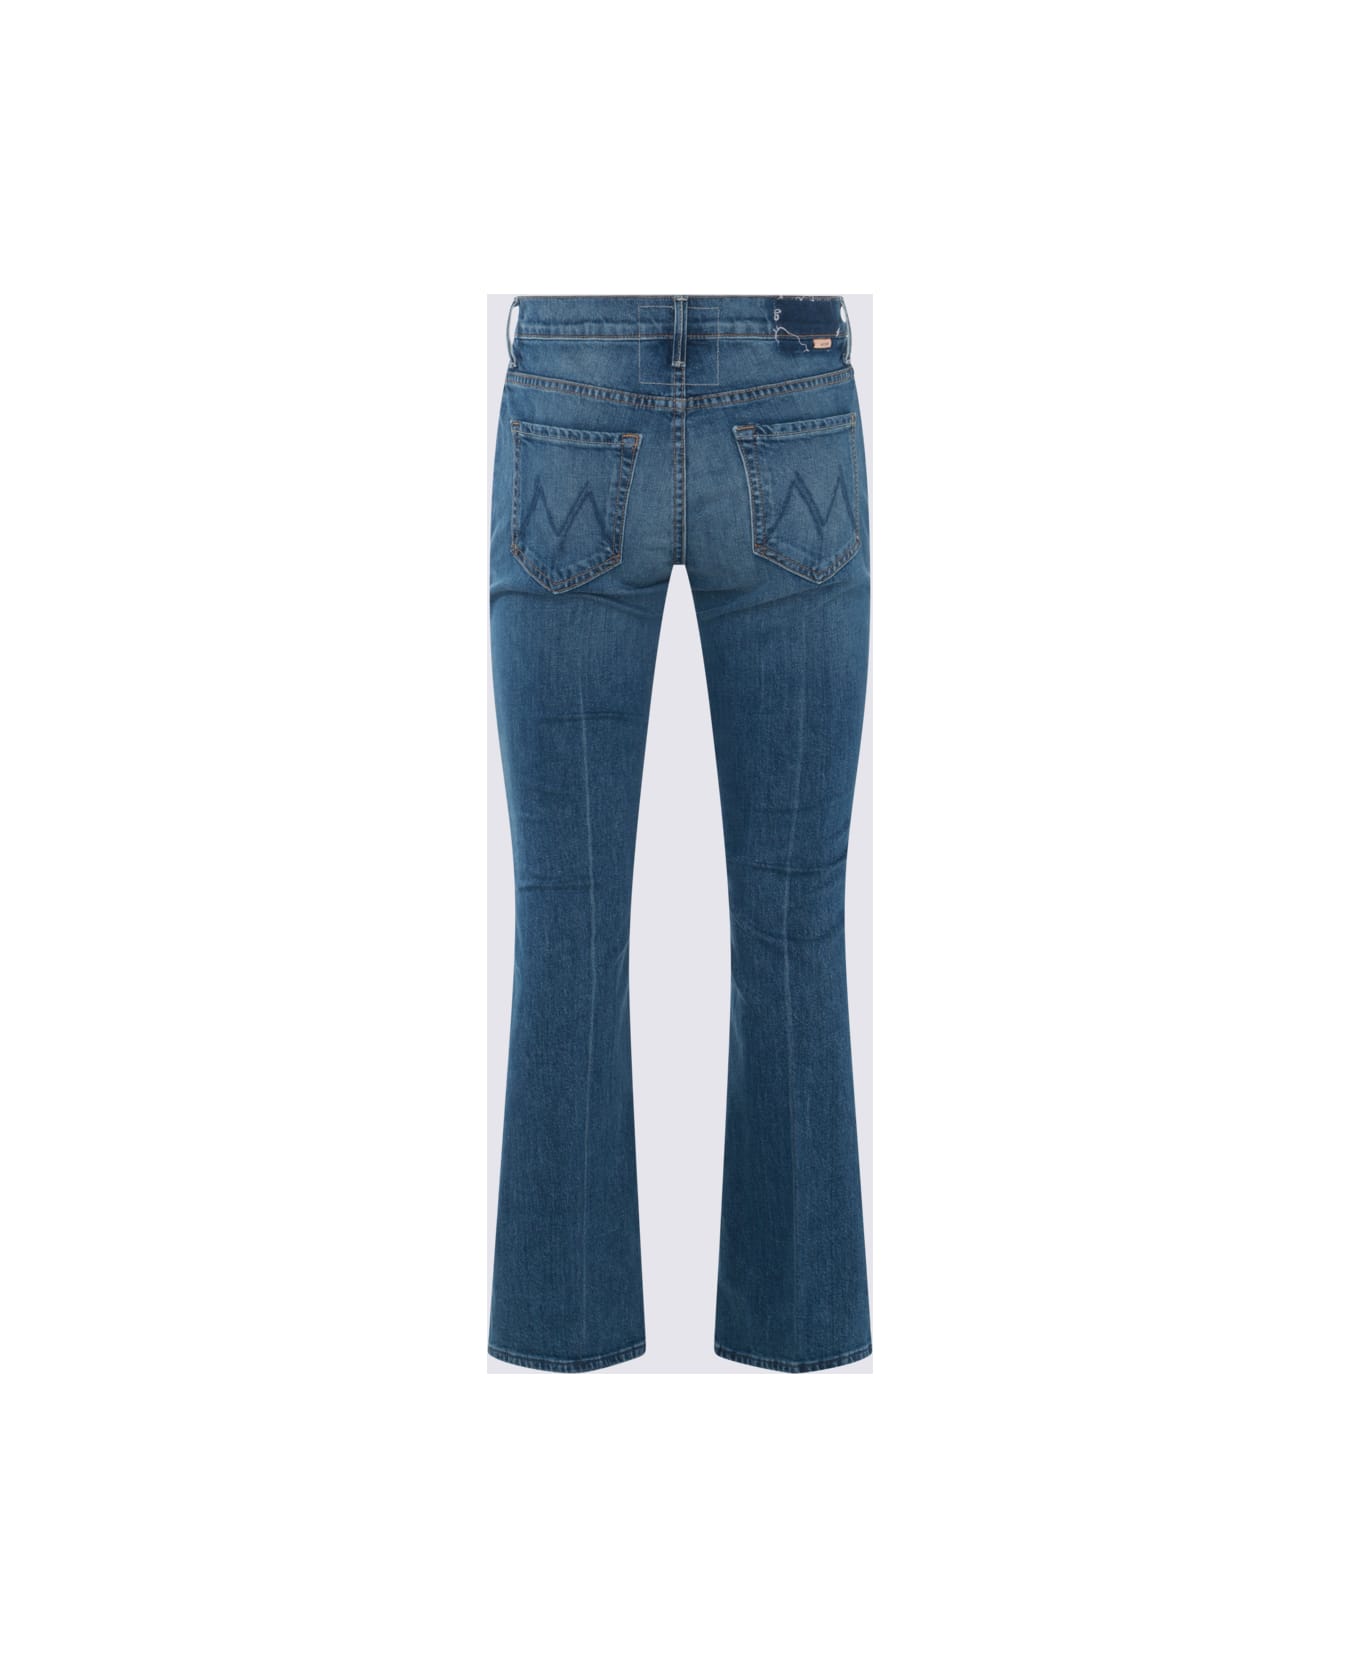 Mother Navy Blue Cotton Blend Jeans - ITS A SMALL WORLD